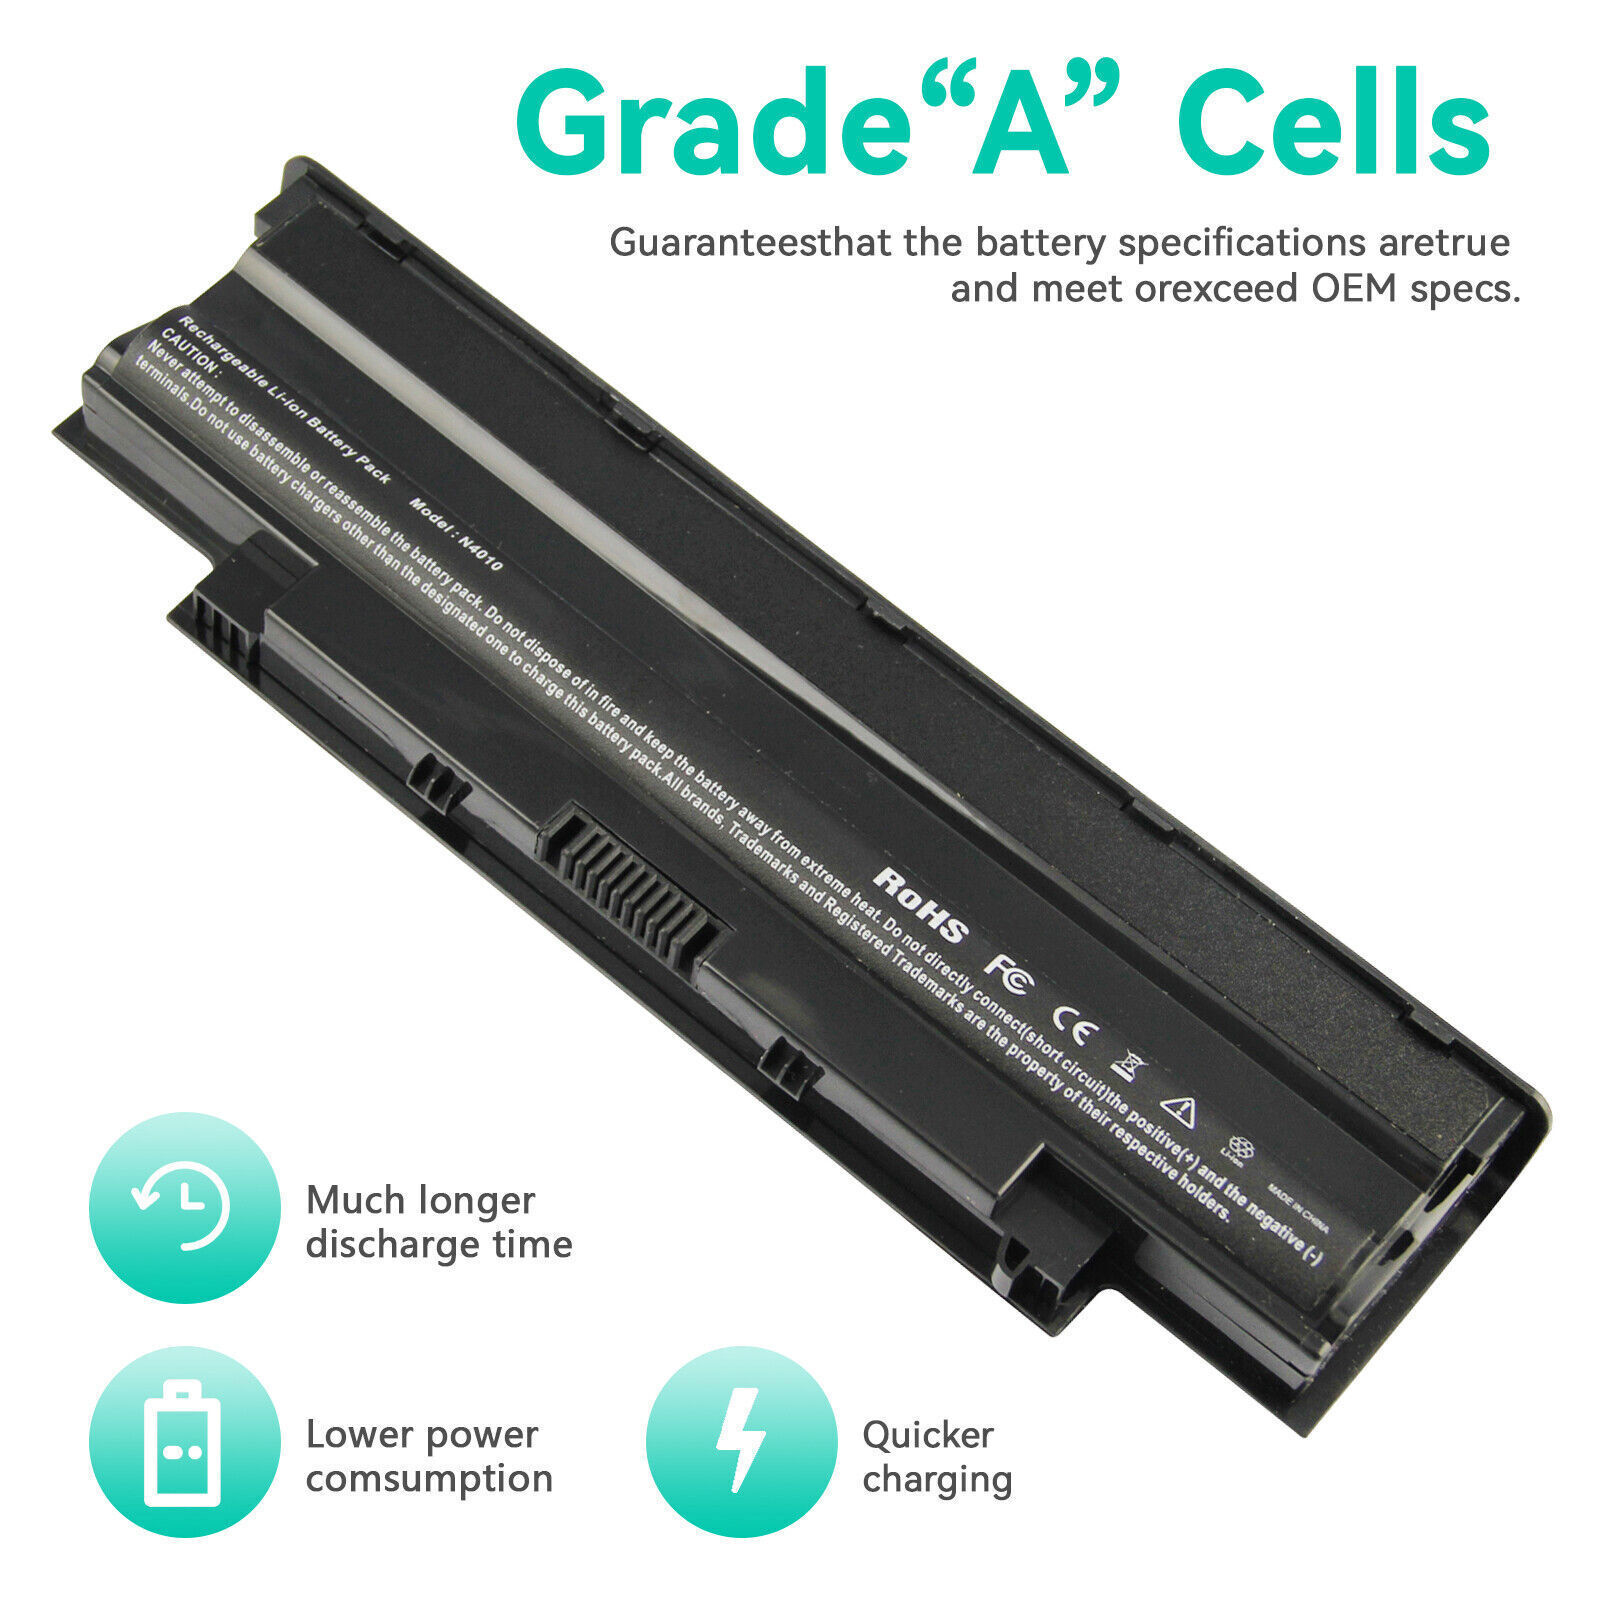 9 Cells Battery J1KND For Dell Inspiron 3520 3420 M5030 N5110 N5050 N7110 N4010